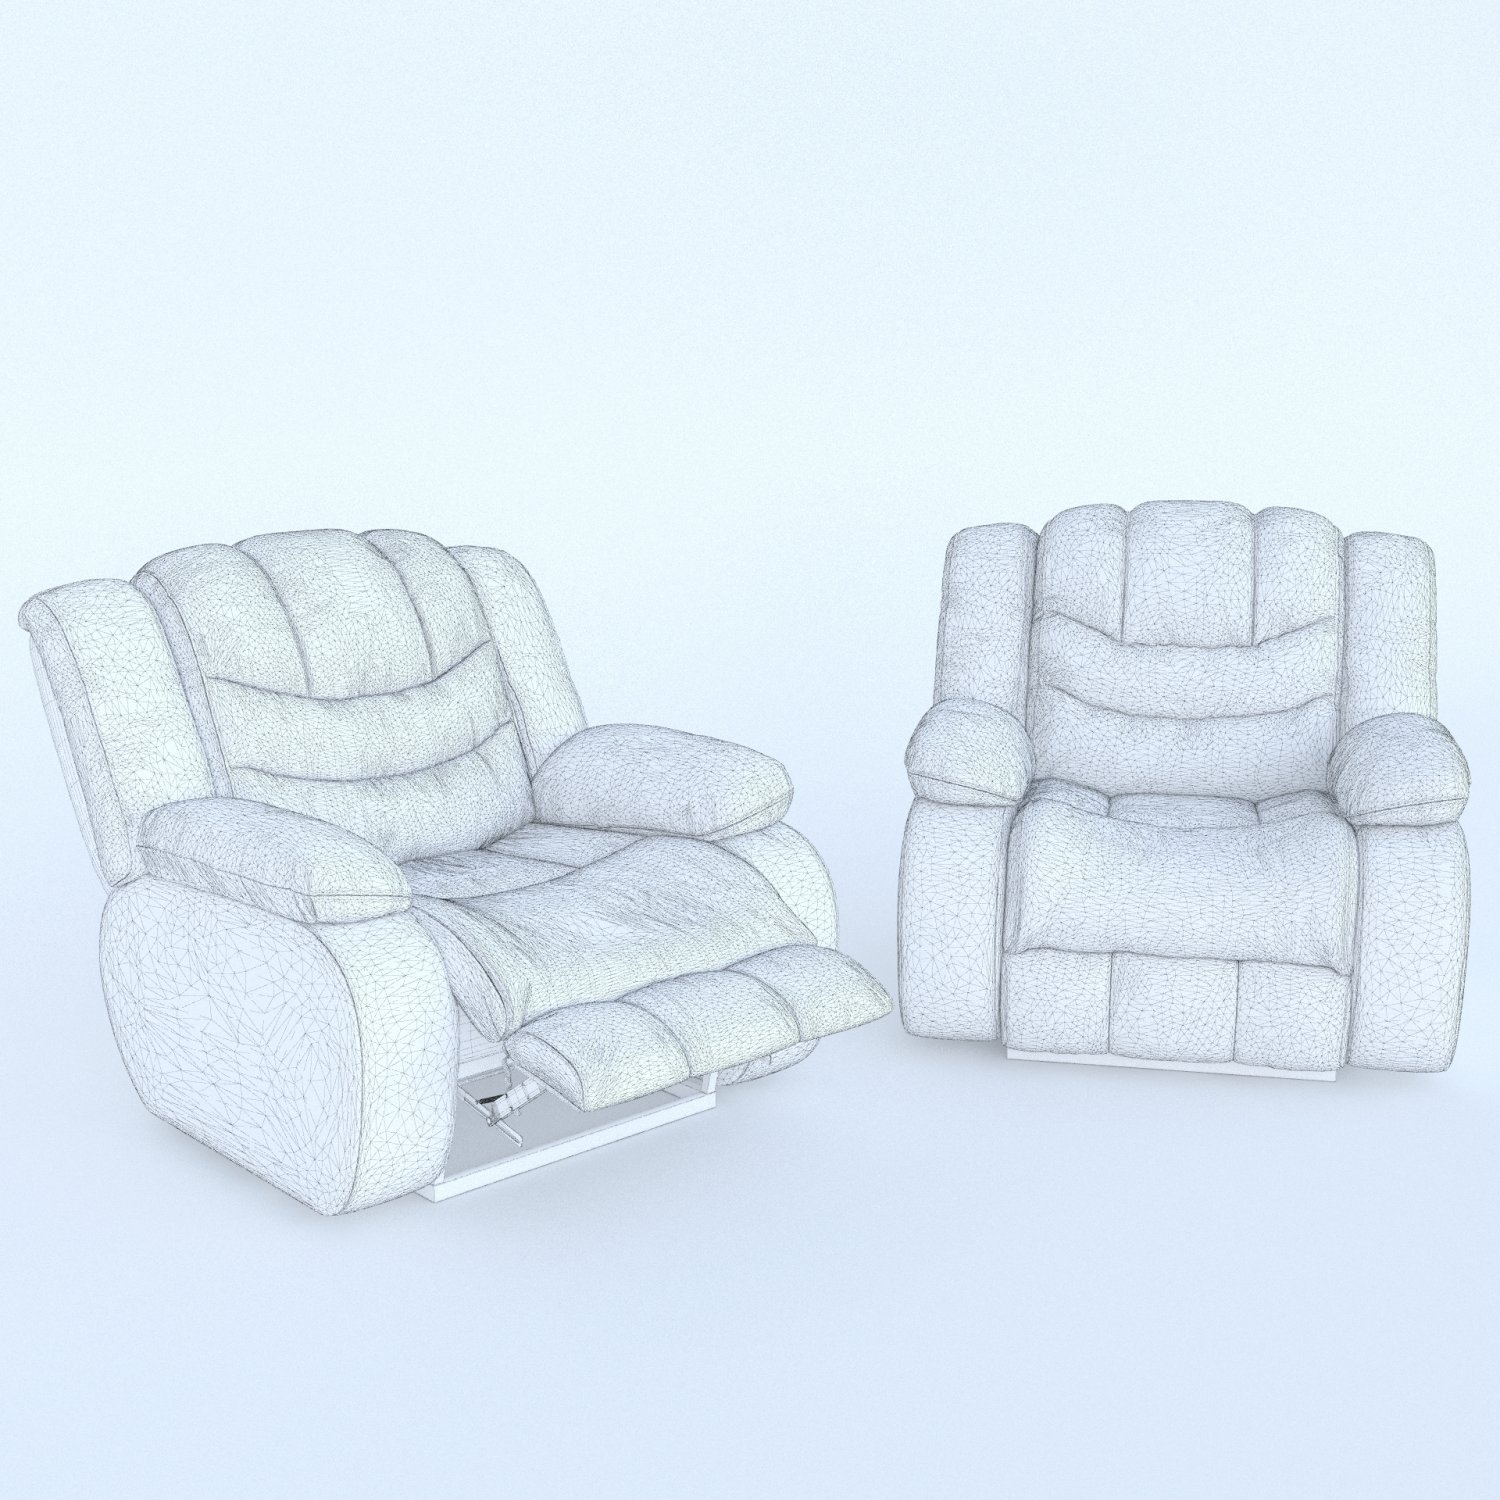 Two armchairs